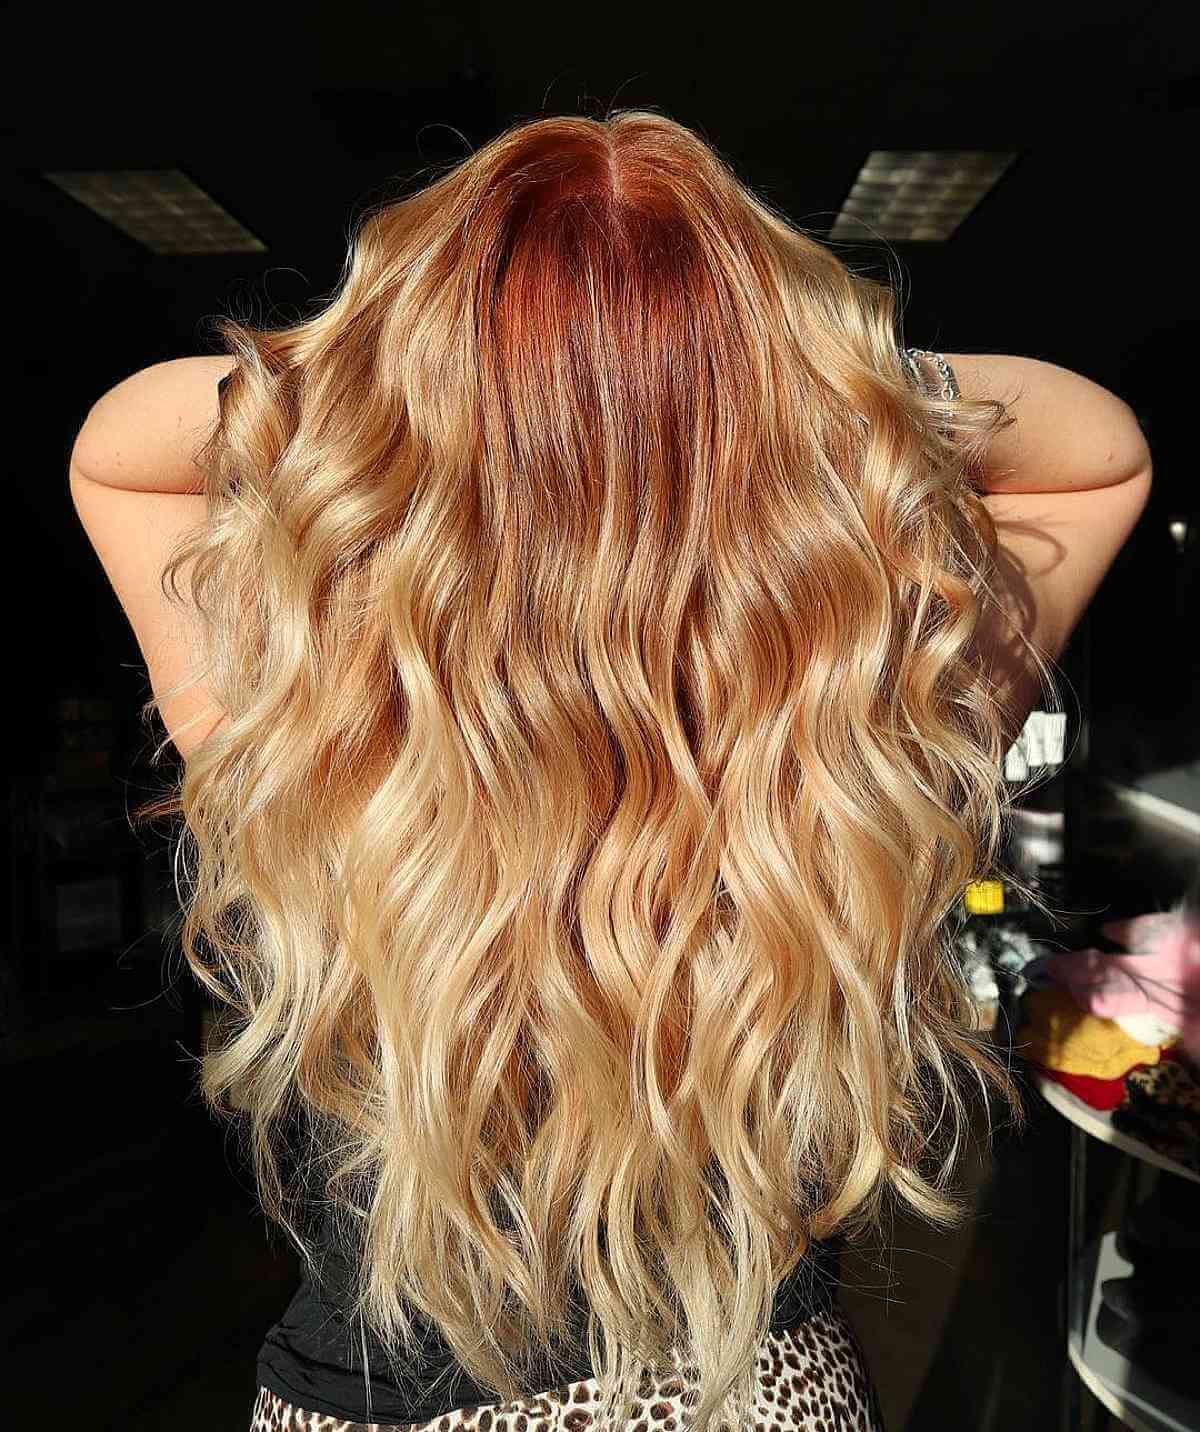 20 Best Light Strawberry Blonde Hair Color Ideas to Match Your Skin Tone